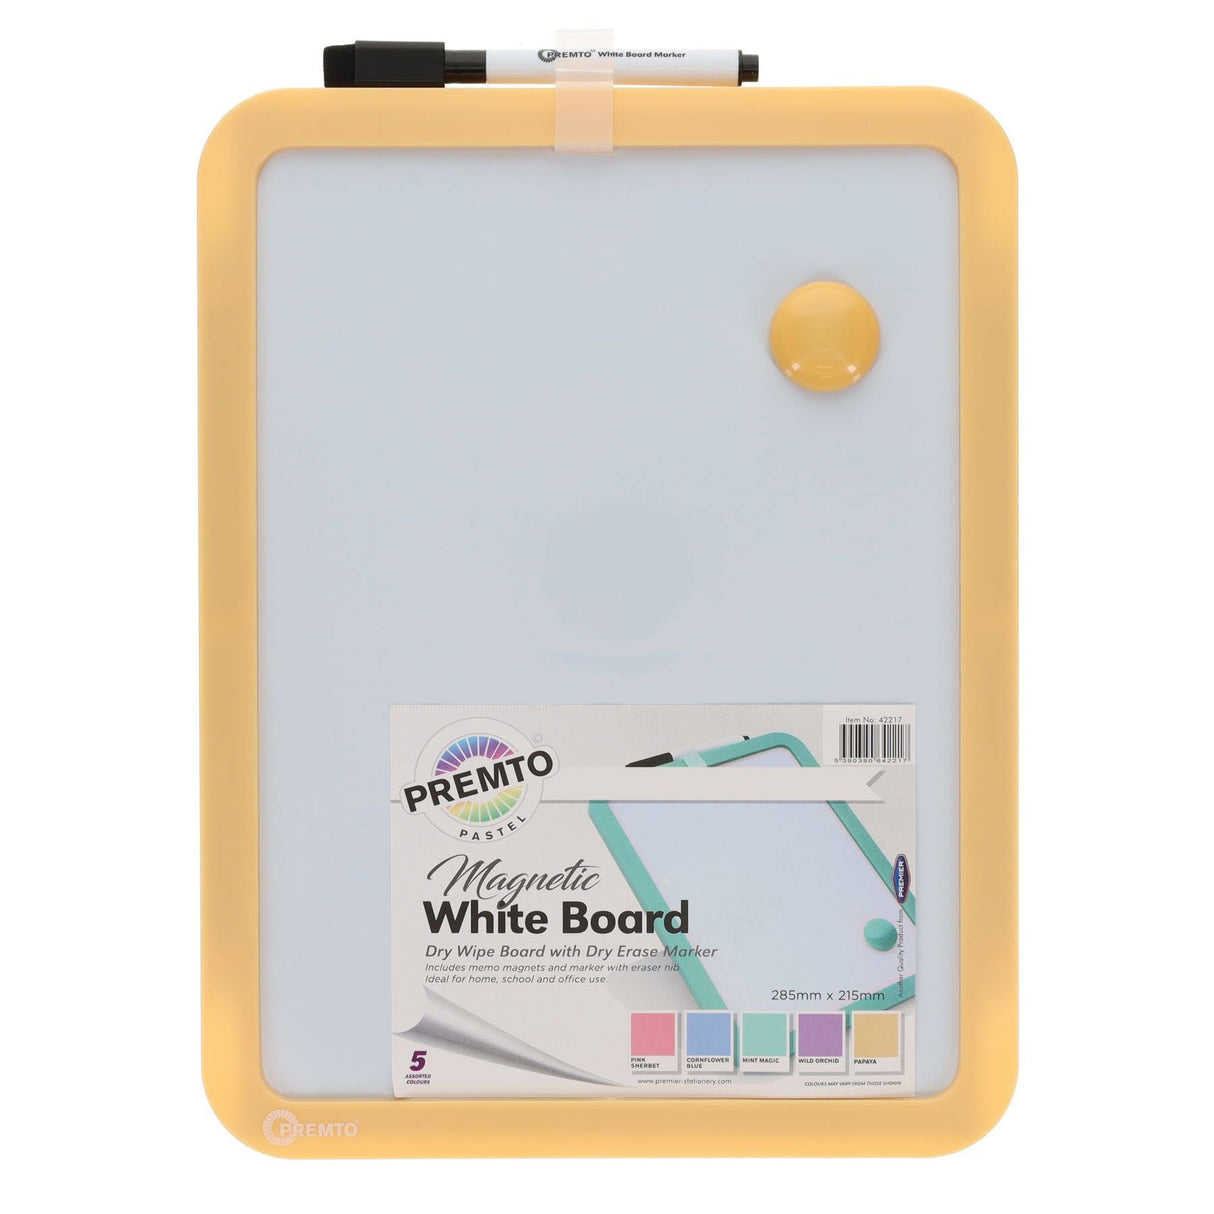 Premto Magnetic White Board With Dry Wipe Marker - Papaya - 285x215mm | Stationery Shop UK